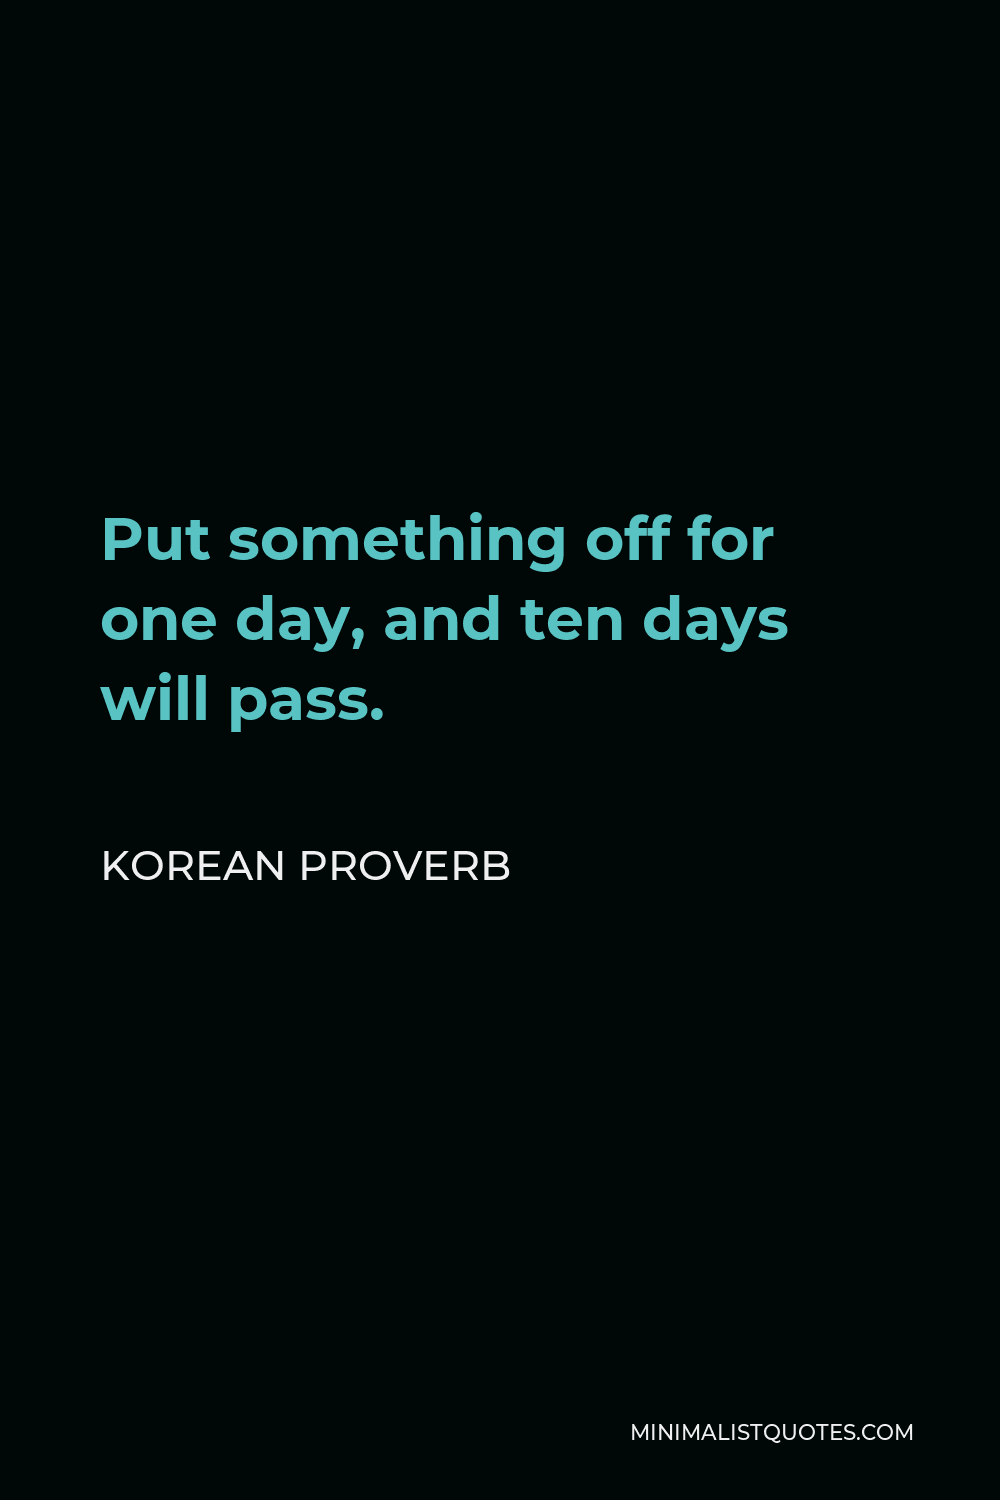 Korean Proverb Quote - Put something off for one day, and ten days will pass.